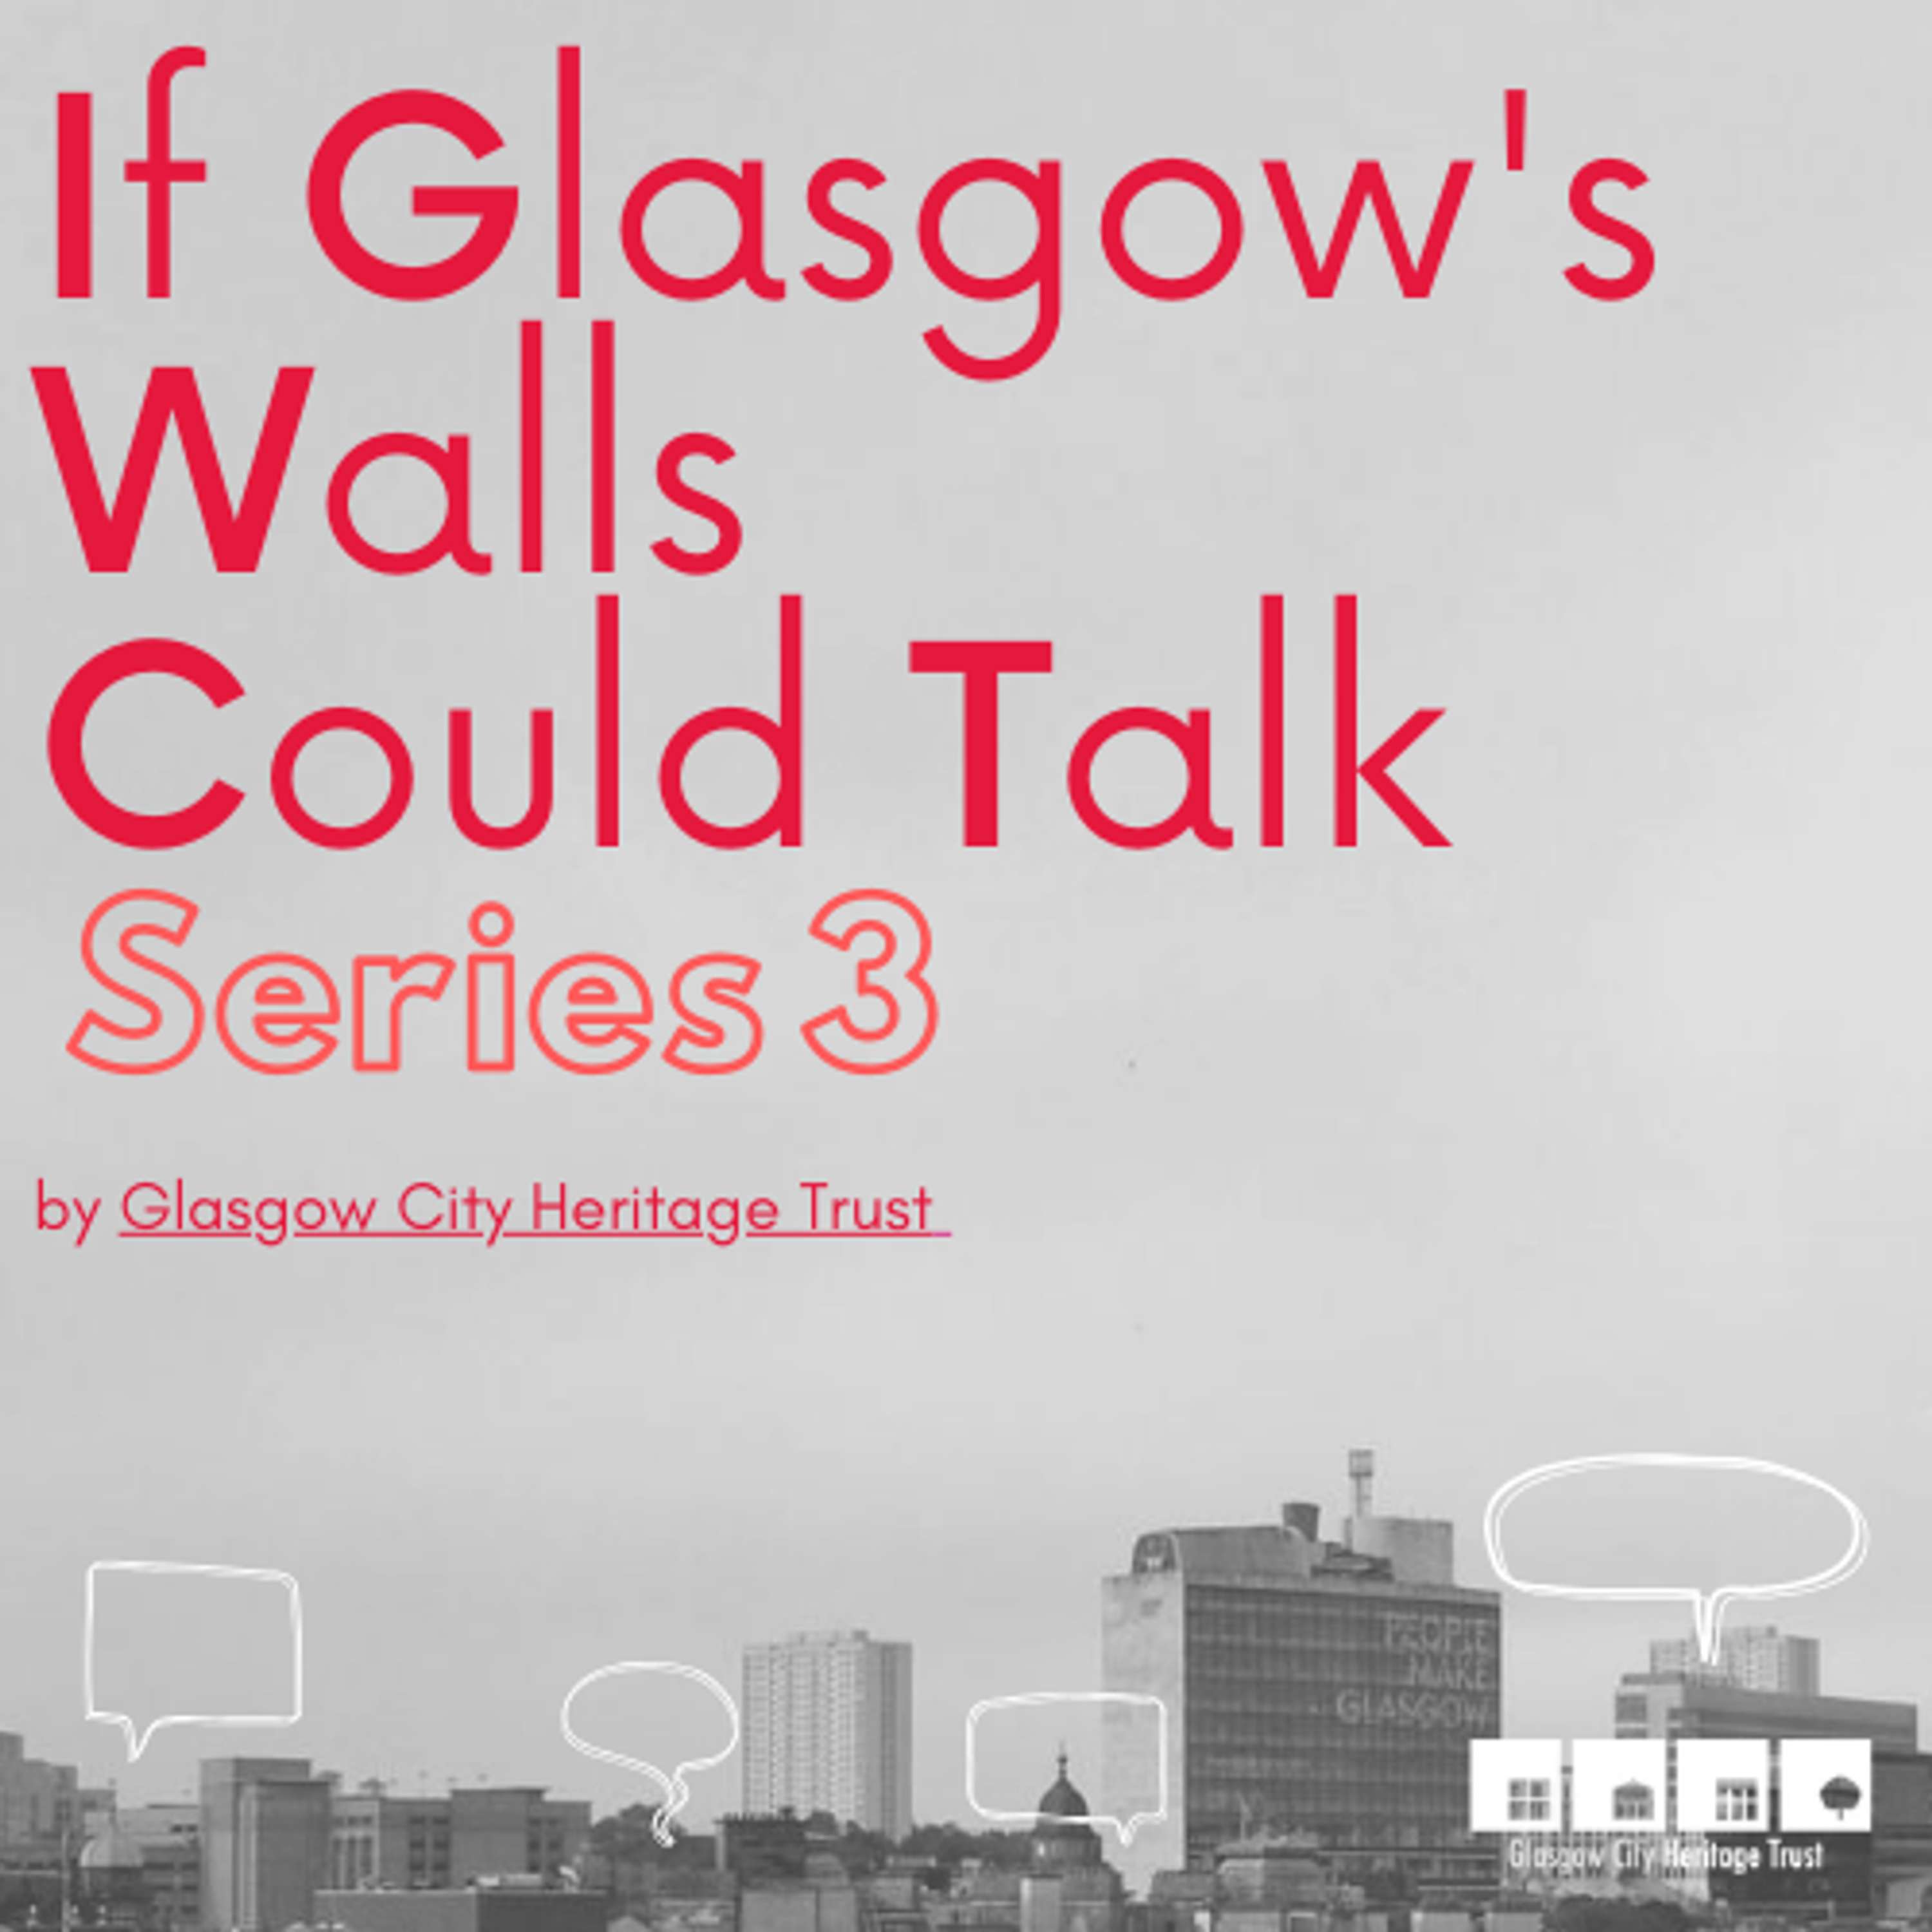 If Glasgow's Walls Could Talk Series 3 teaser